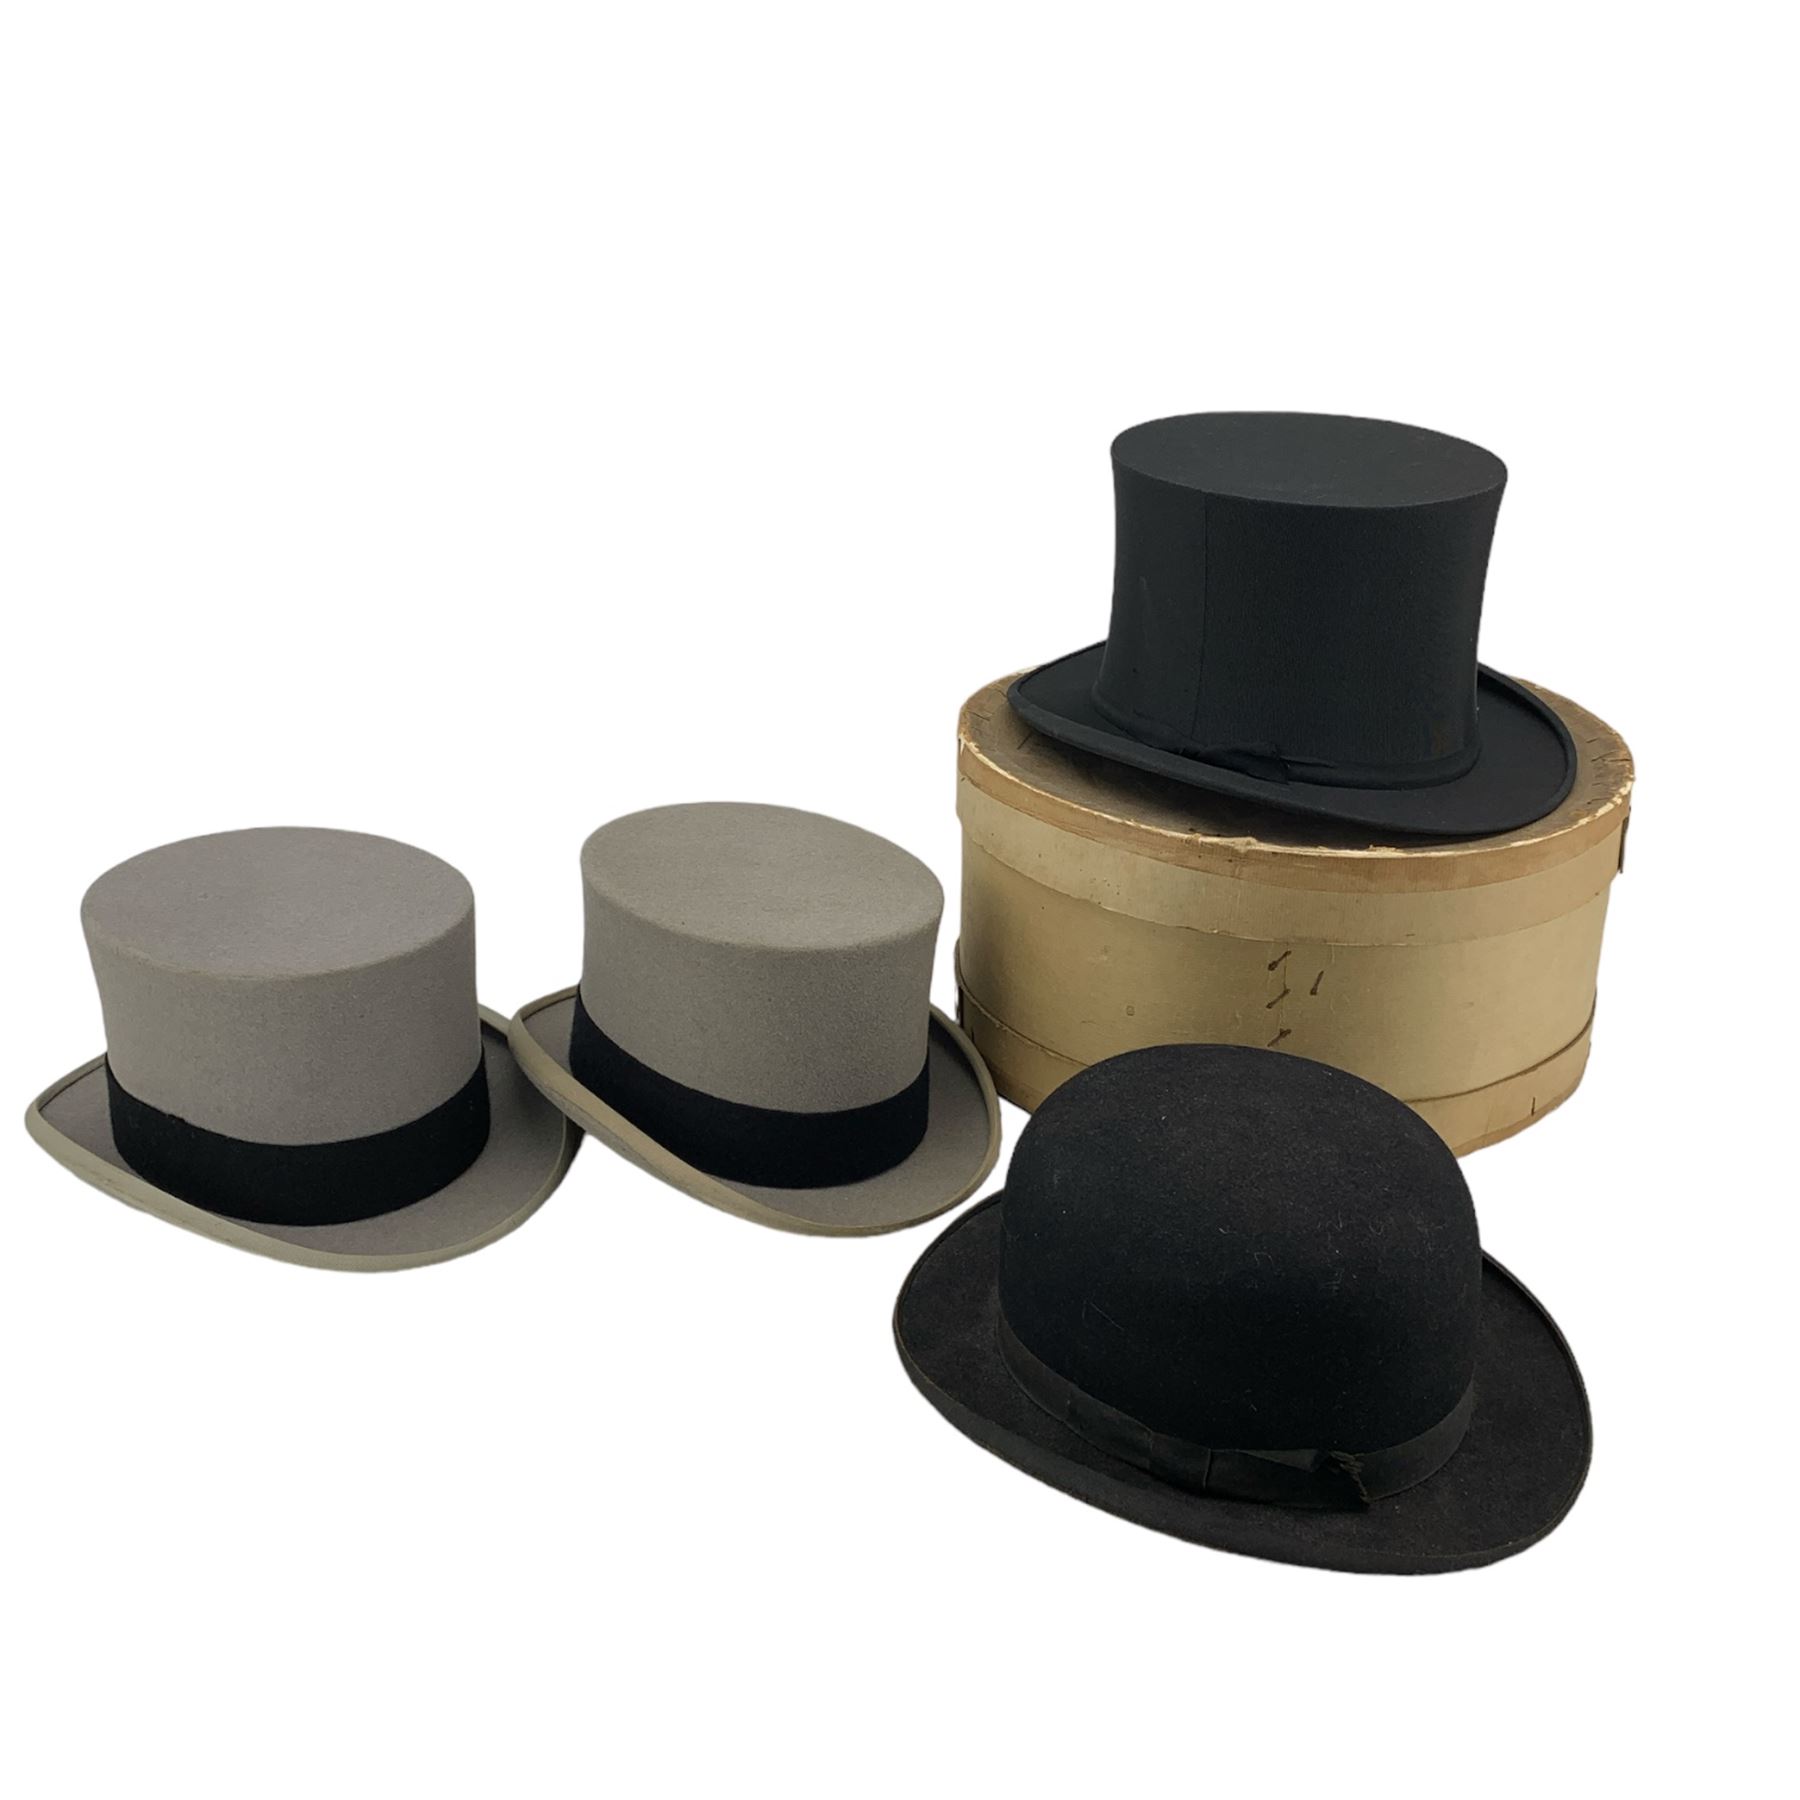 Four early 20th century hats